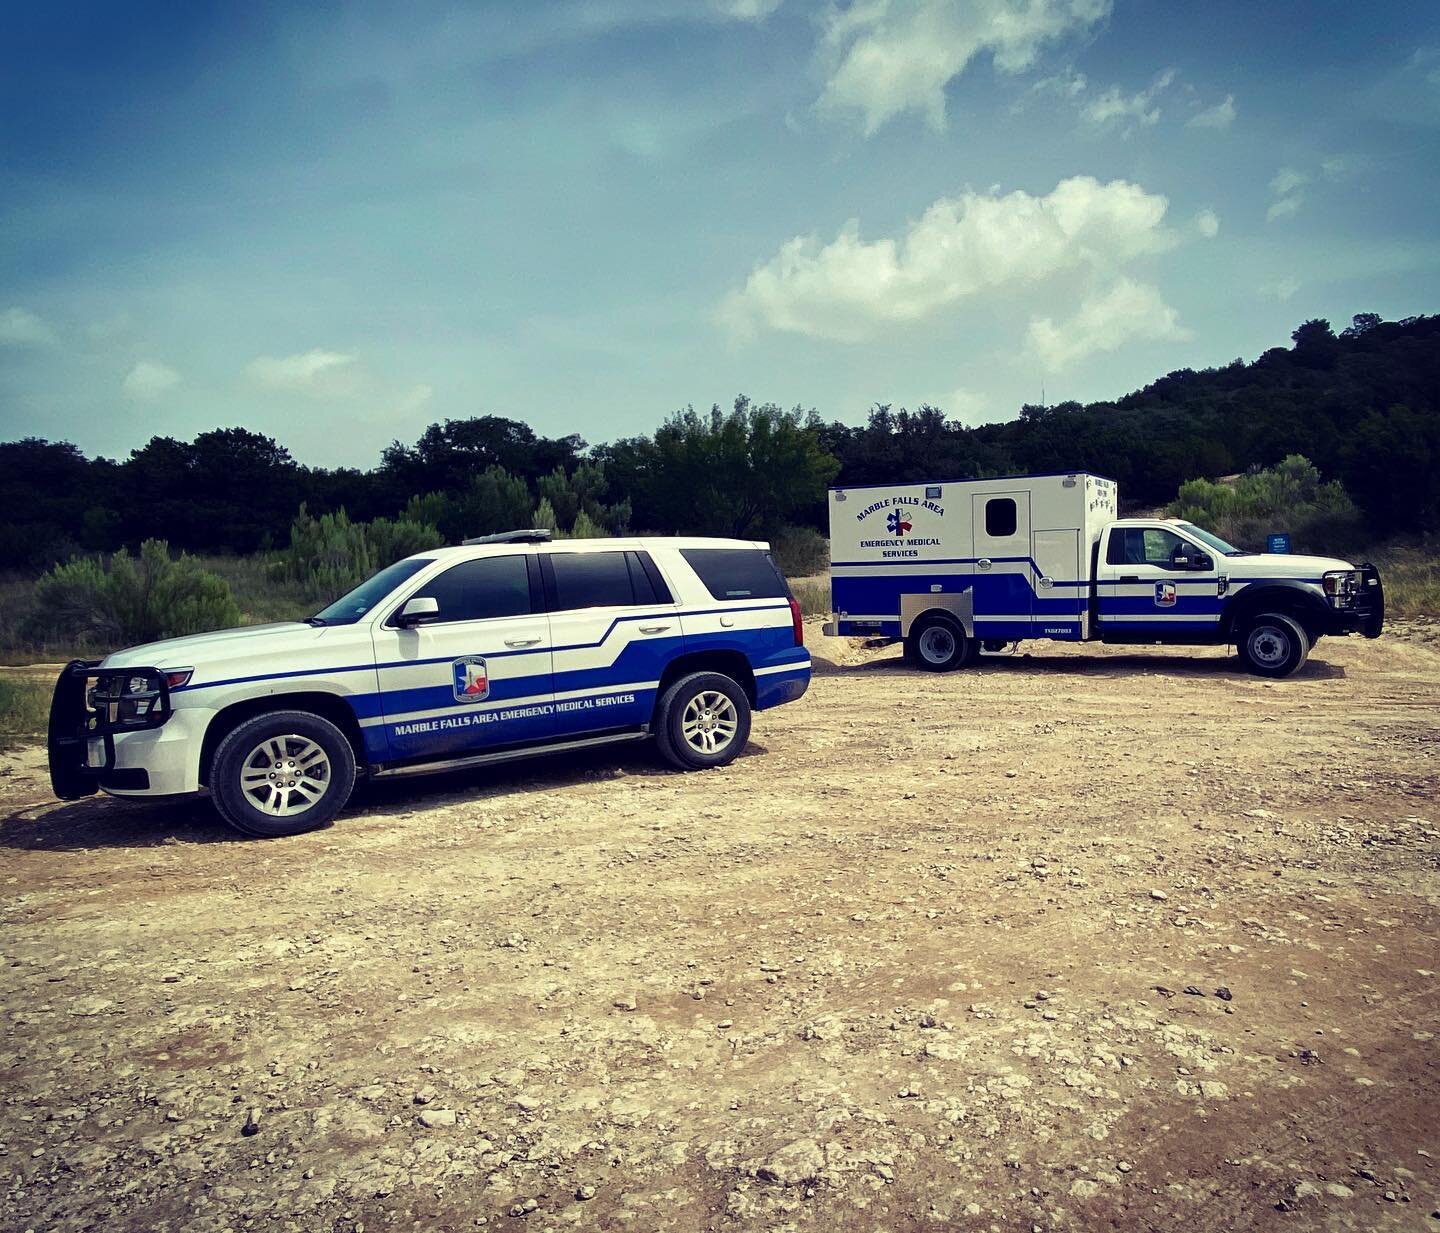 Command Truck and New Truck.jpg